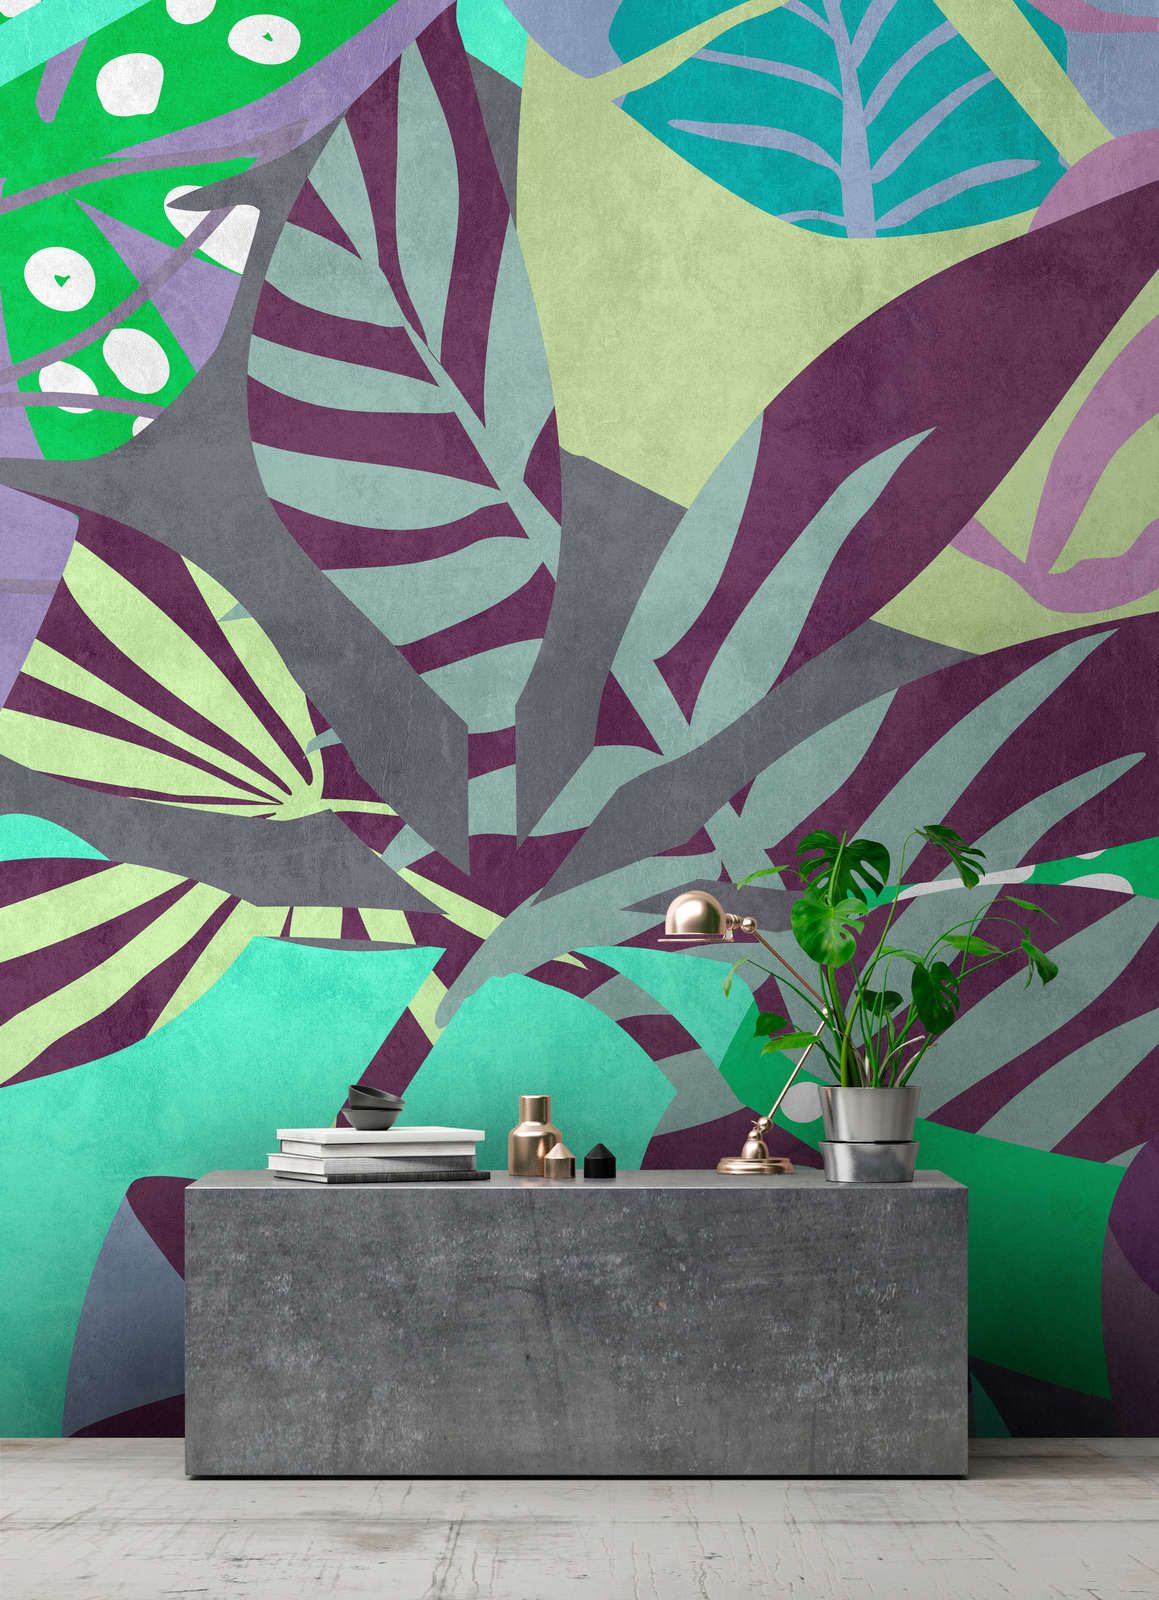             Photo wallpaper »anais 2« - Abstract leaves on concrete plaster texture - Purple, Green | Matt, Smooth non-woven fabric
        